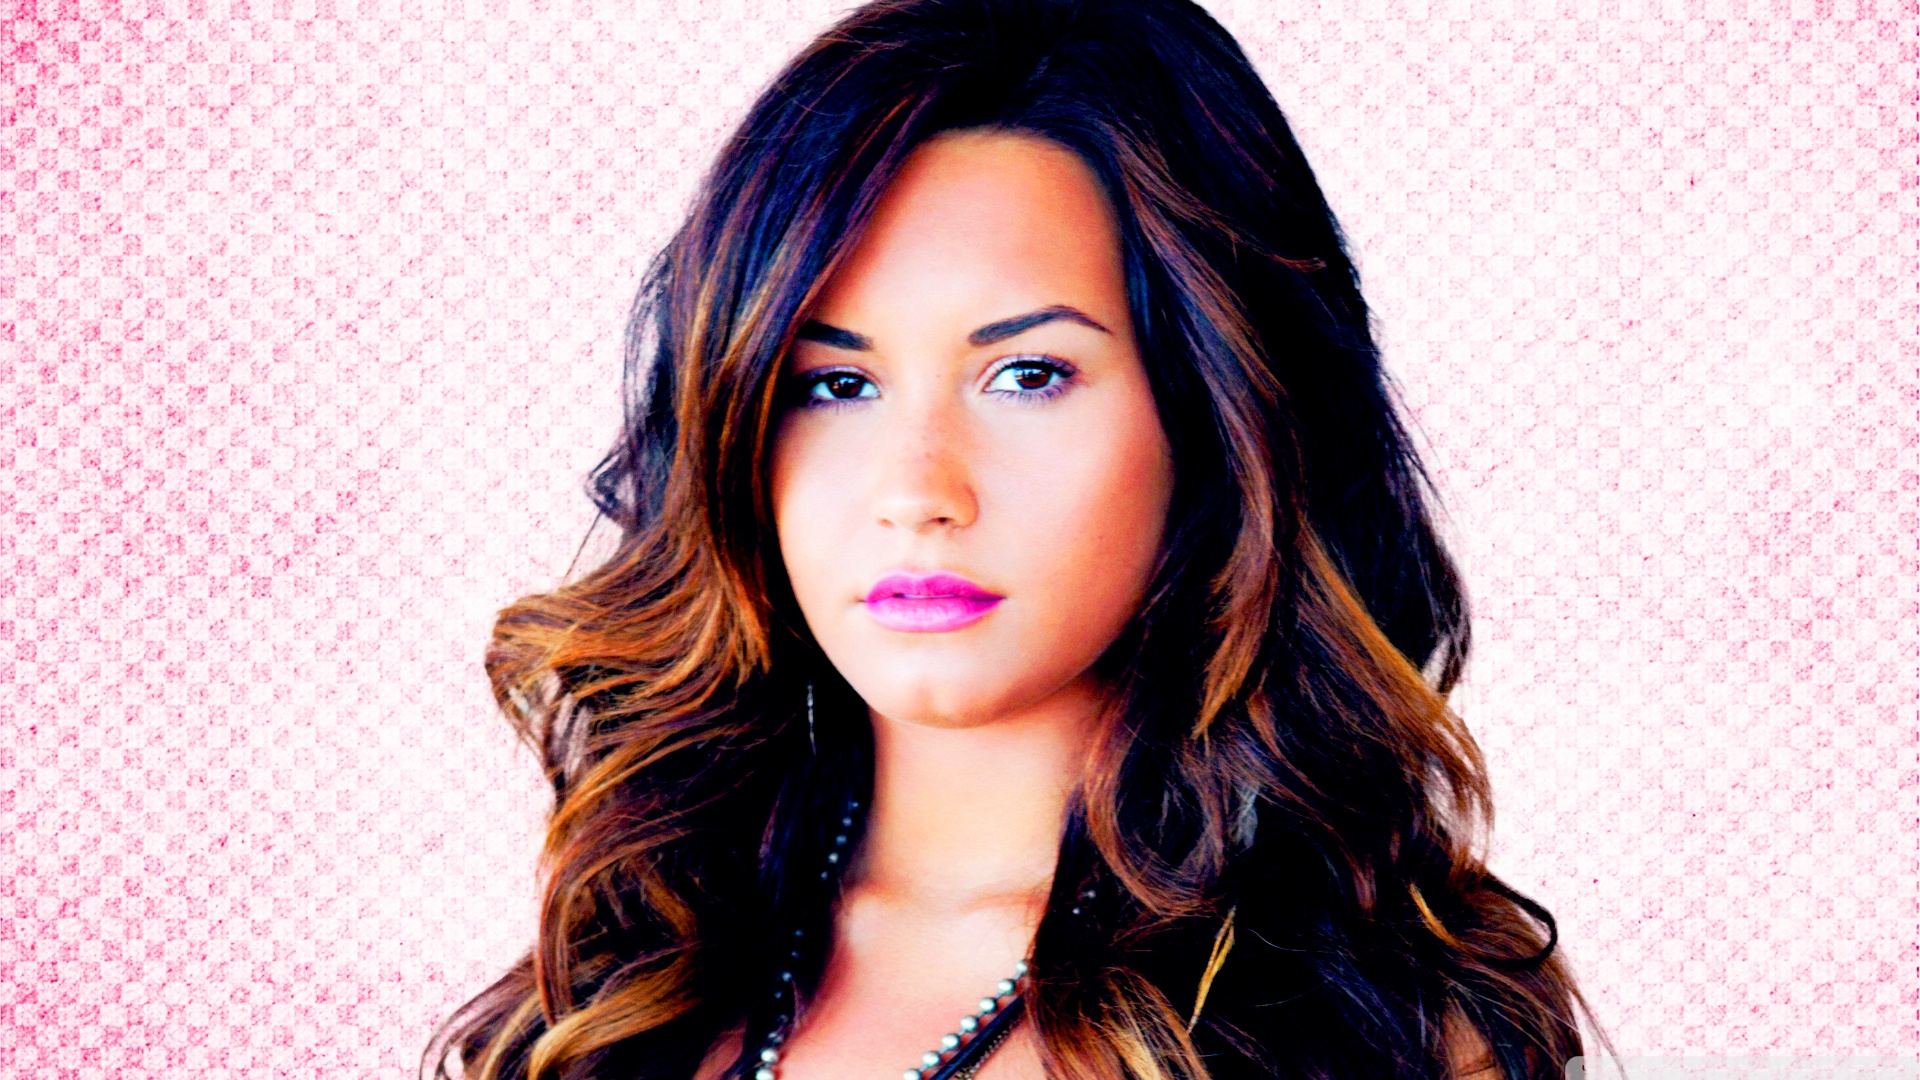  on October 29 2015 By Stephen Comments Off on Demi Lovato Wallpaper